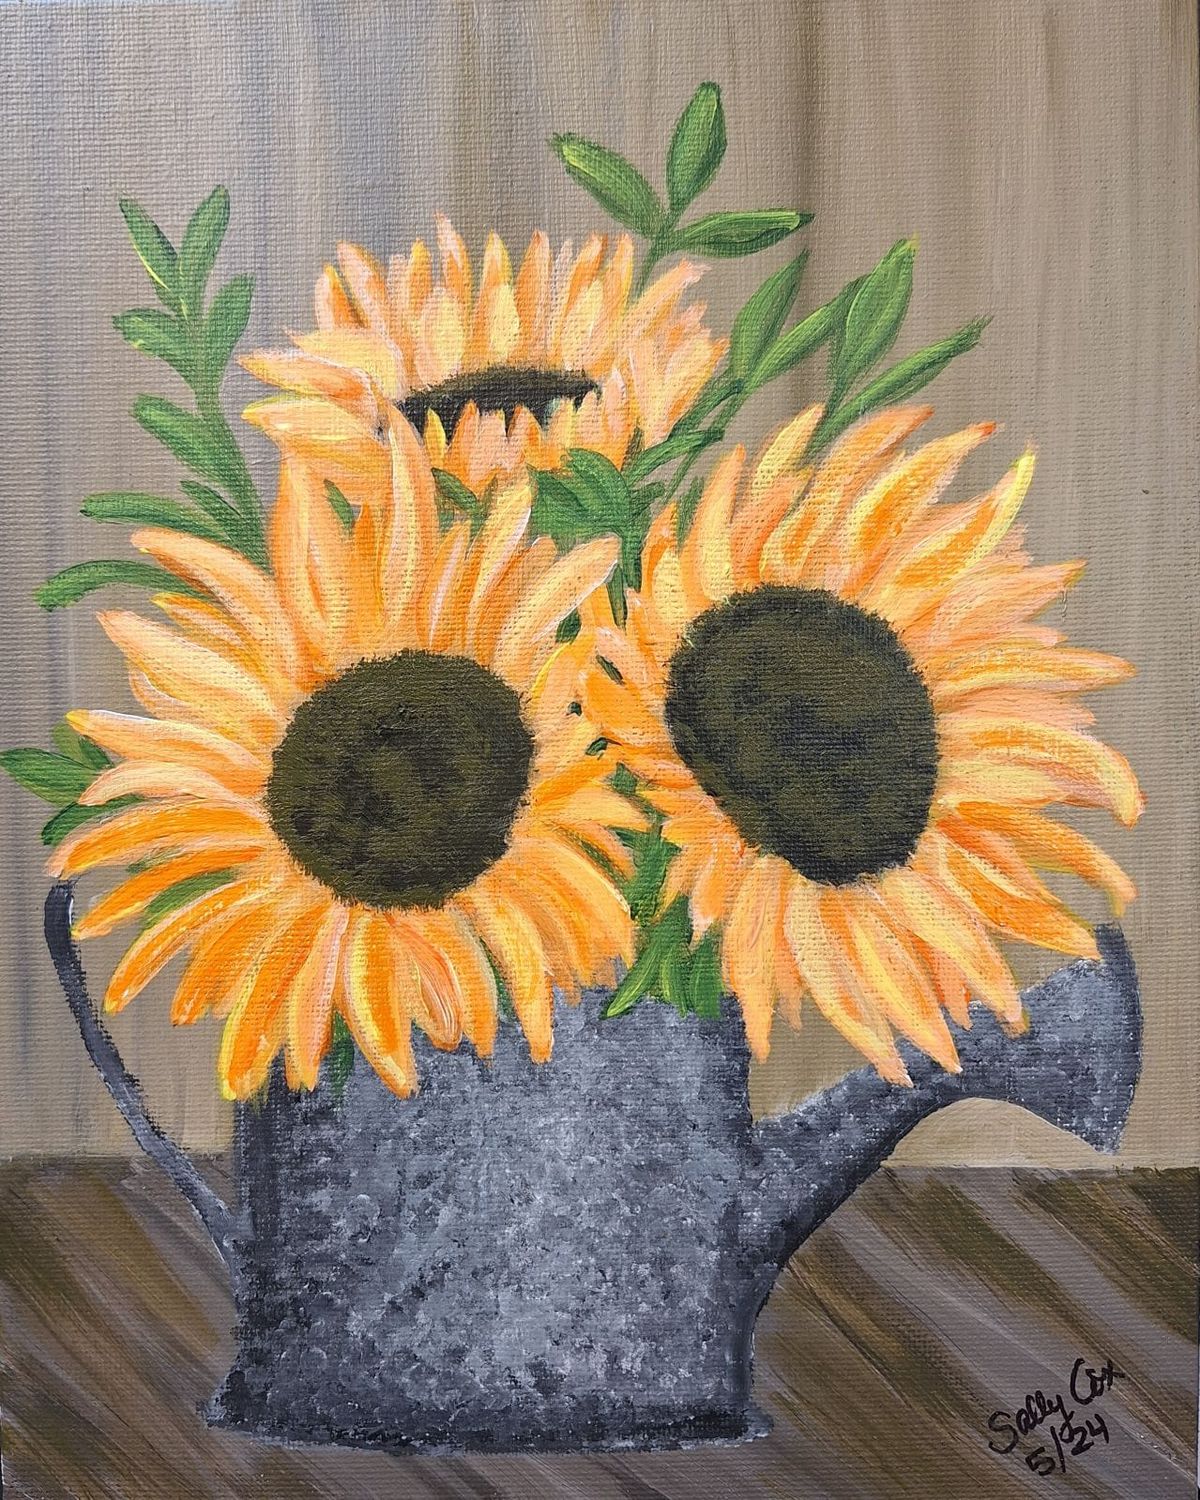 SOLD OUT! Sprinkling Sunflowers \ud83c\udf3b Paint & Sip Party with Sally on July 16th, 6-8pm